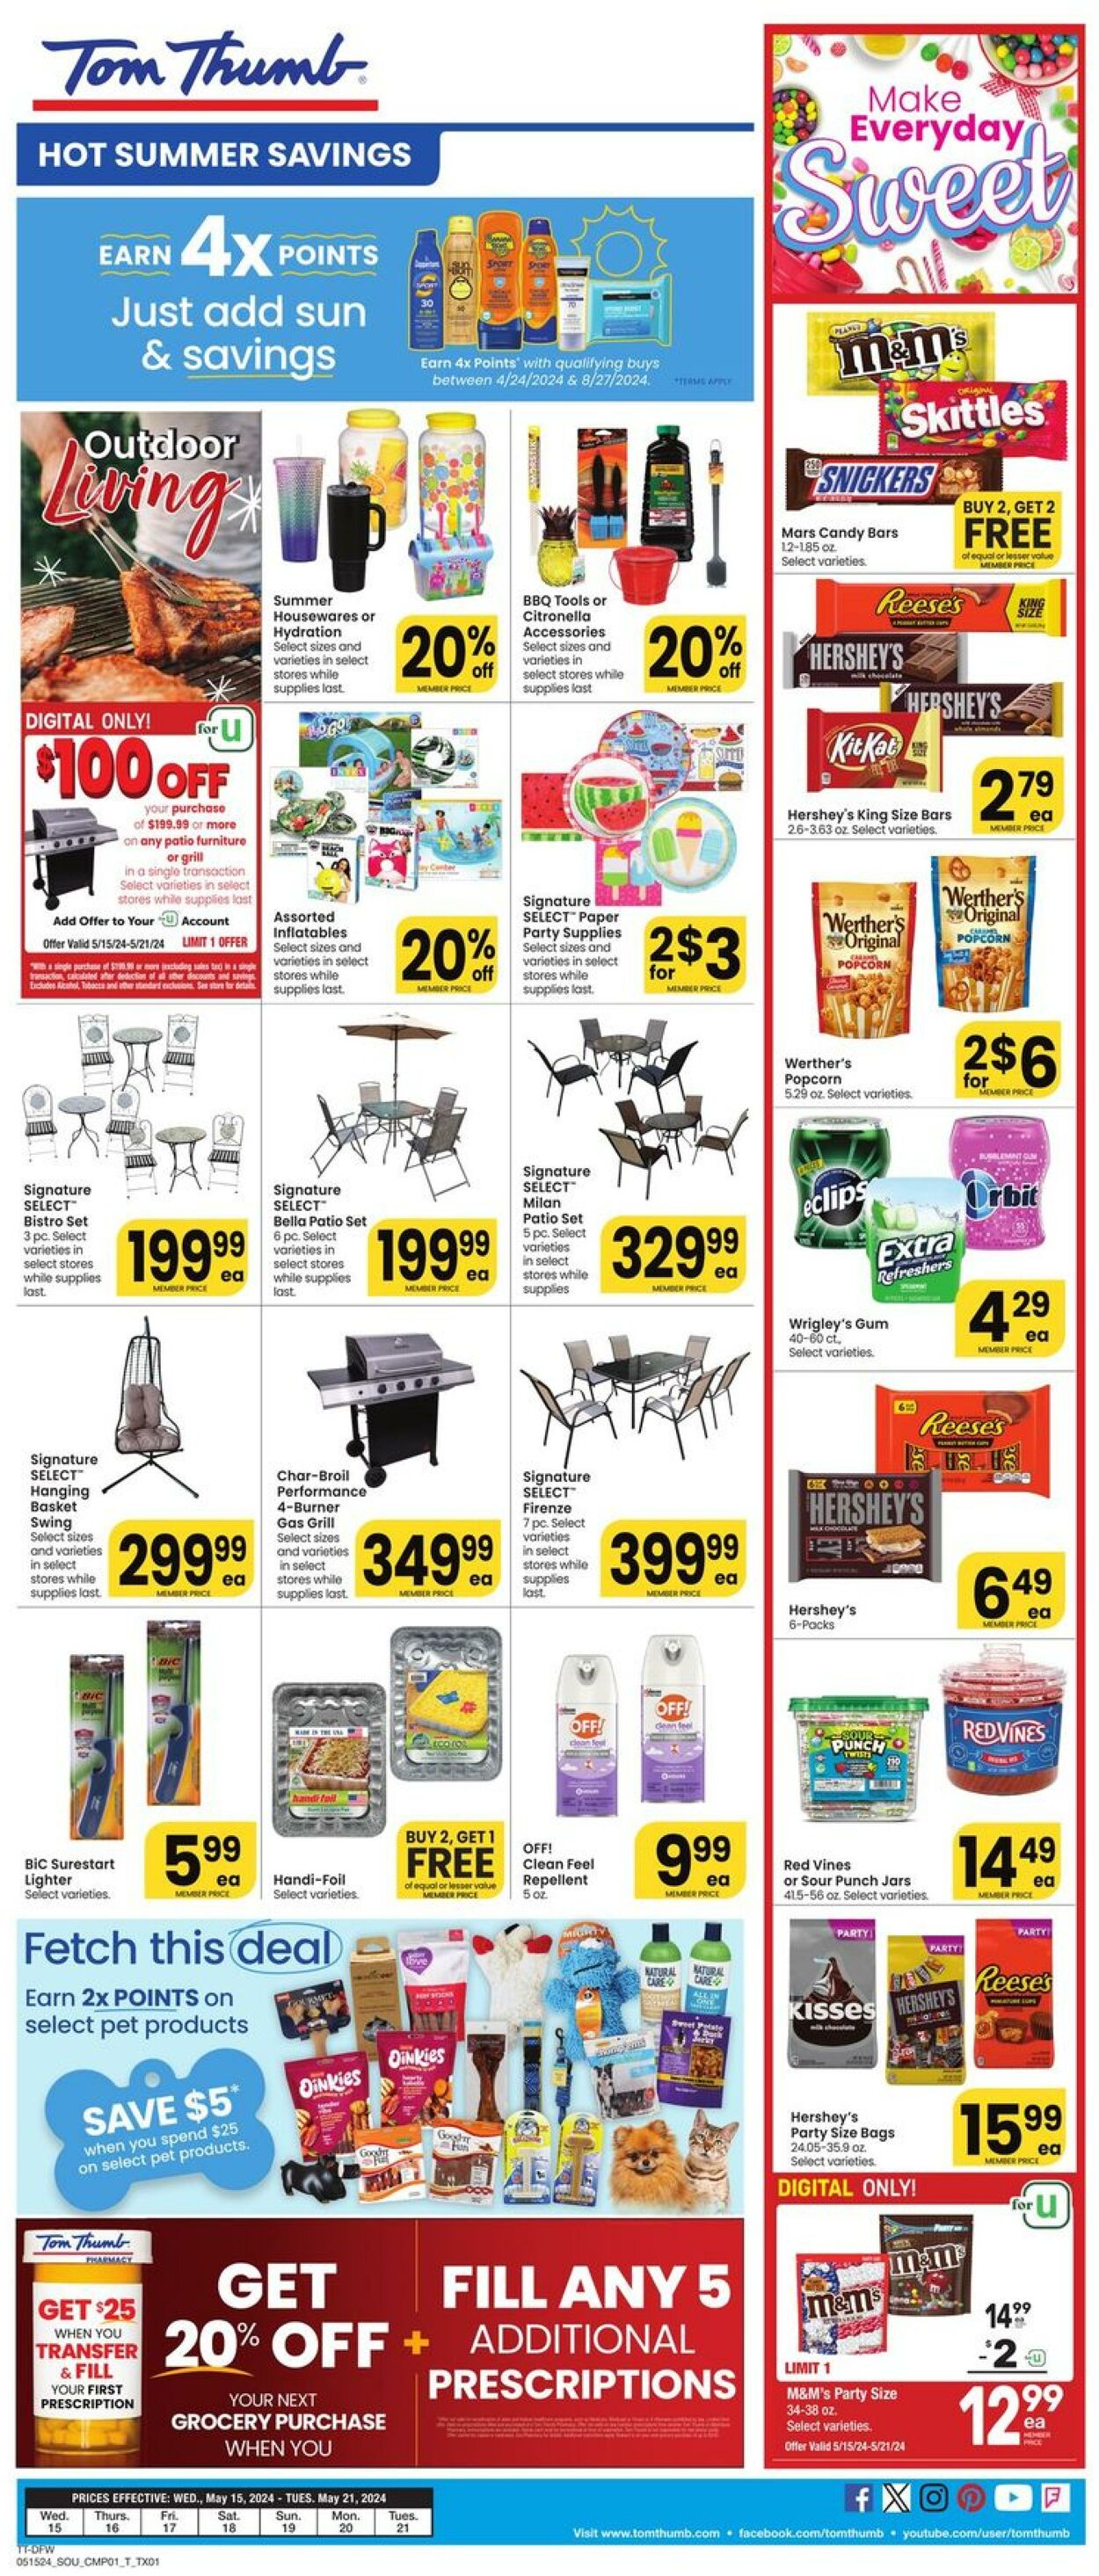 Tom Thumb Promotional weekly ads